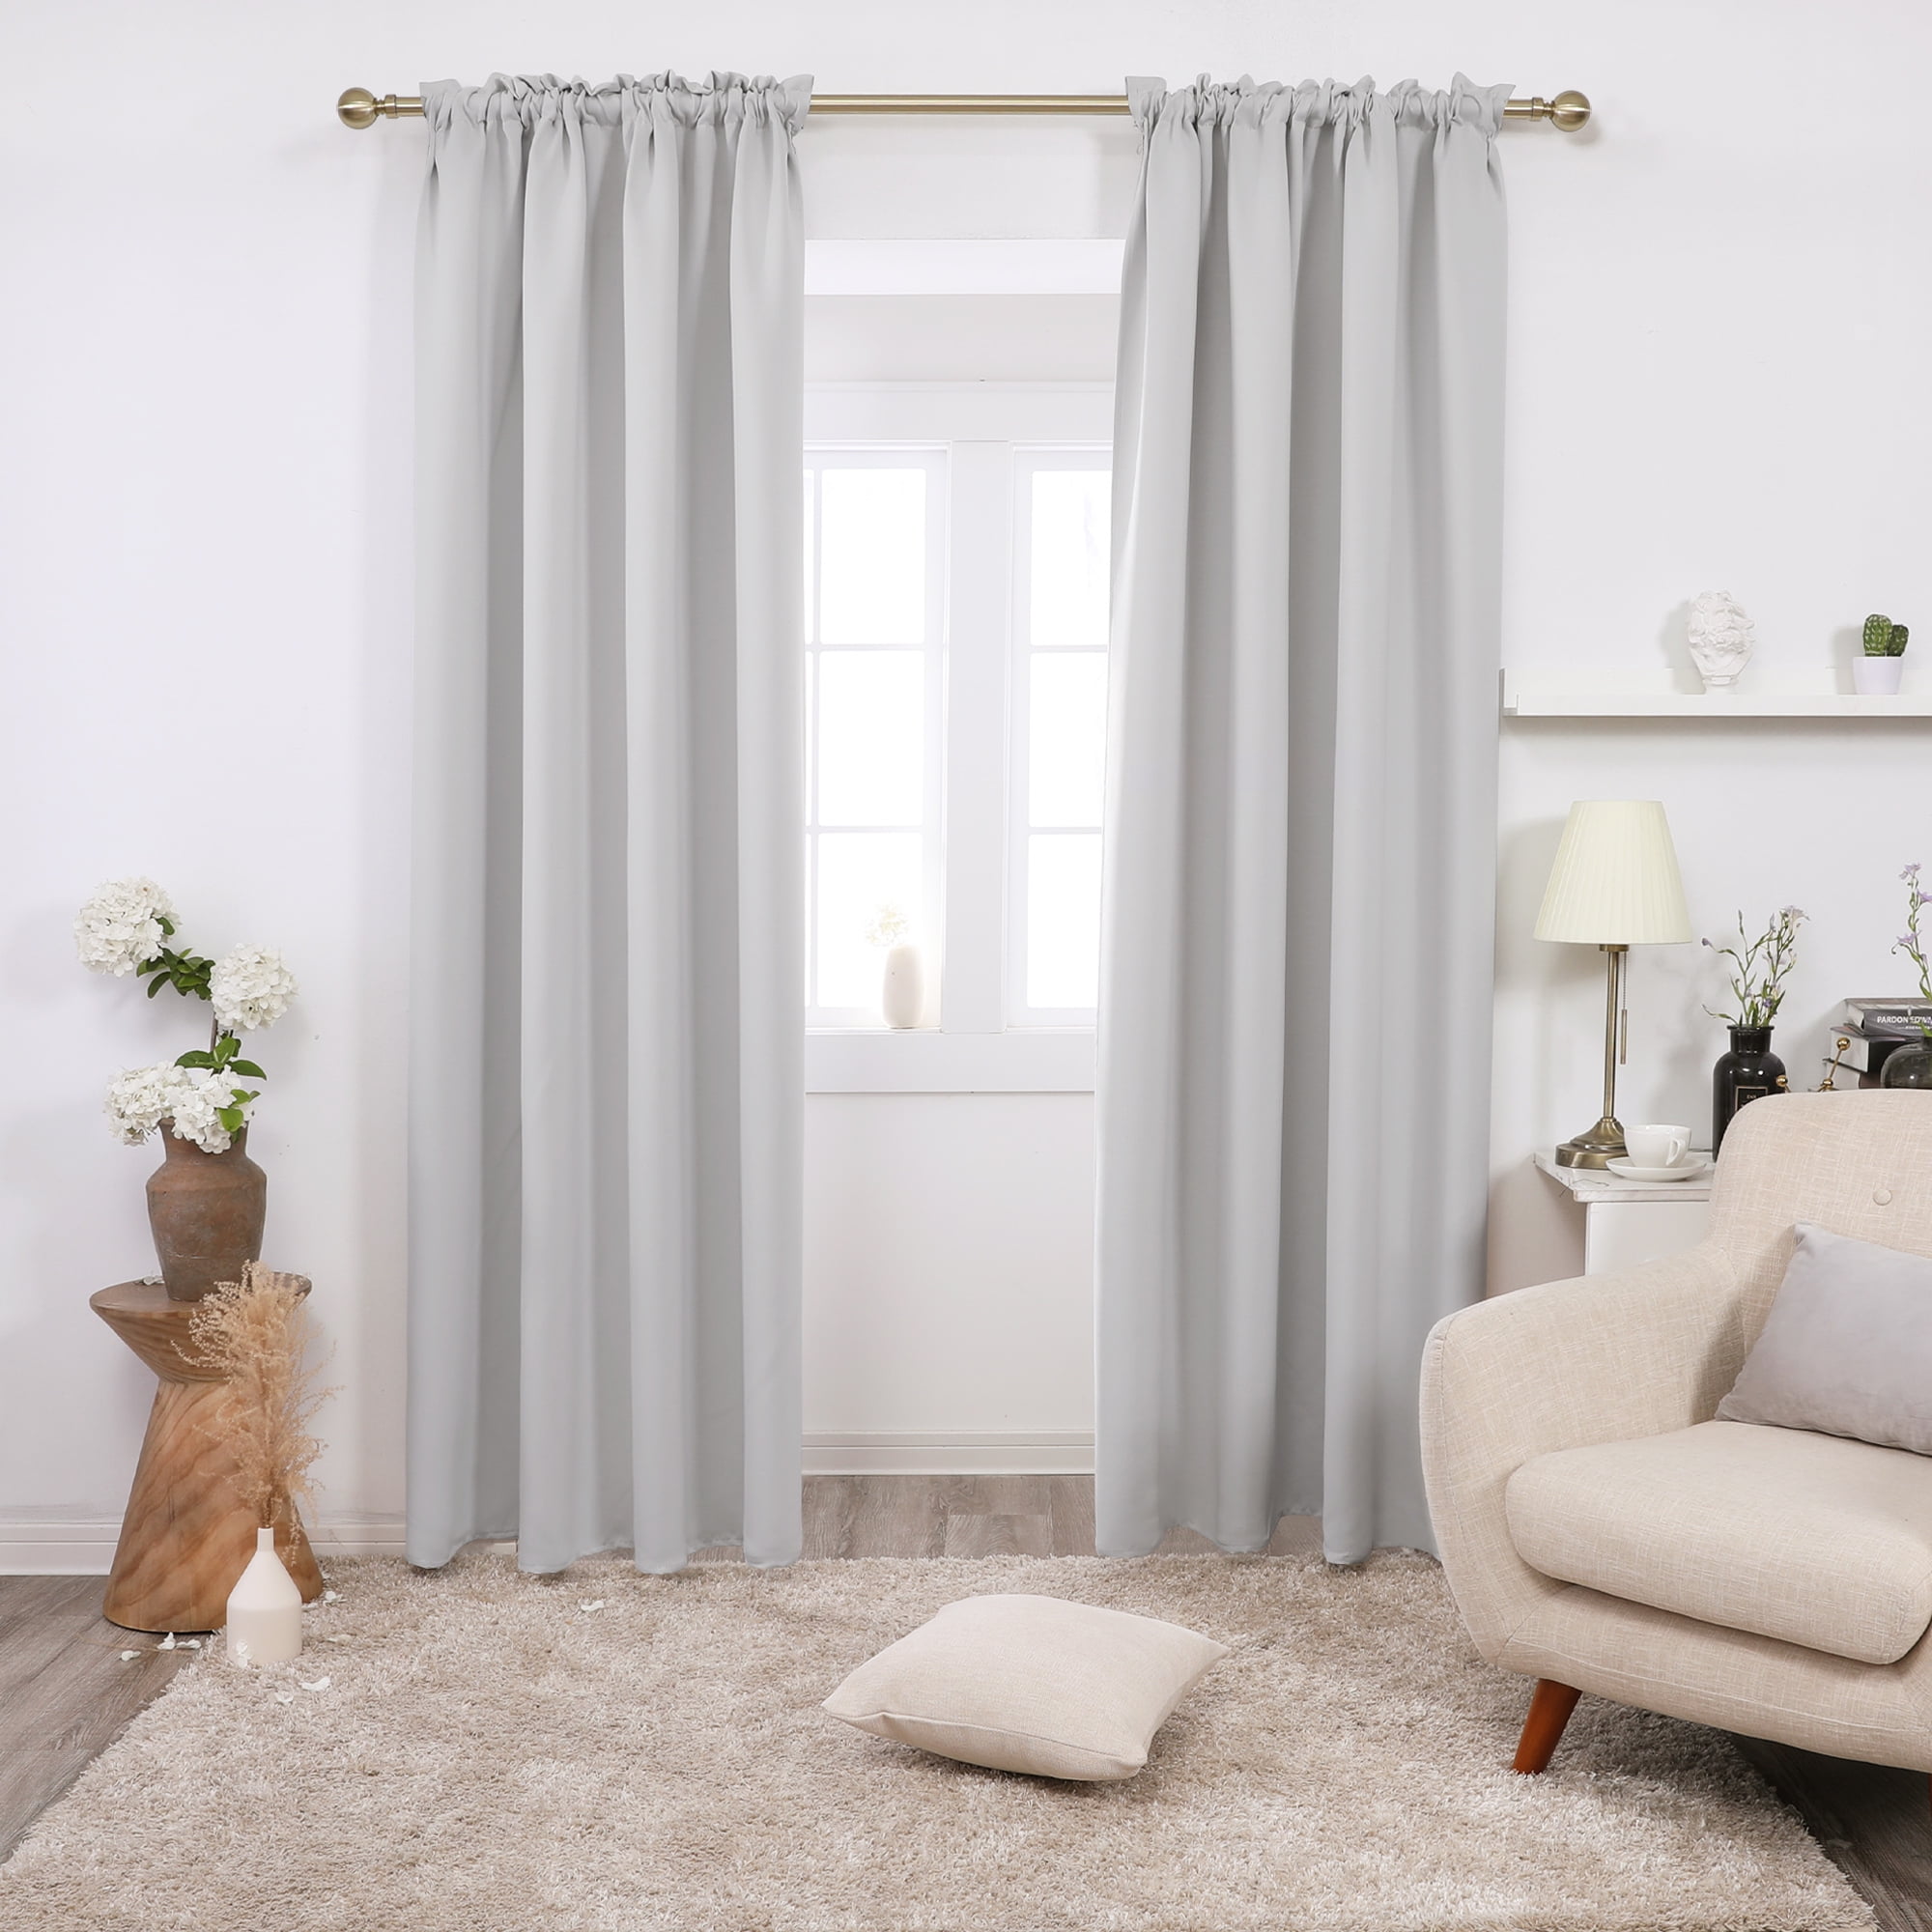 Grey-Wave 52X84Inch Deconovo Jacquard Luxurious Pattern Curtains with Rod Pocket Window Panels for Kids Room